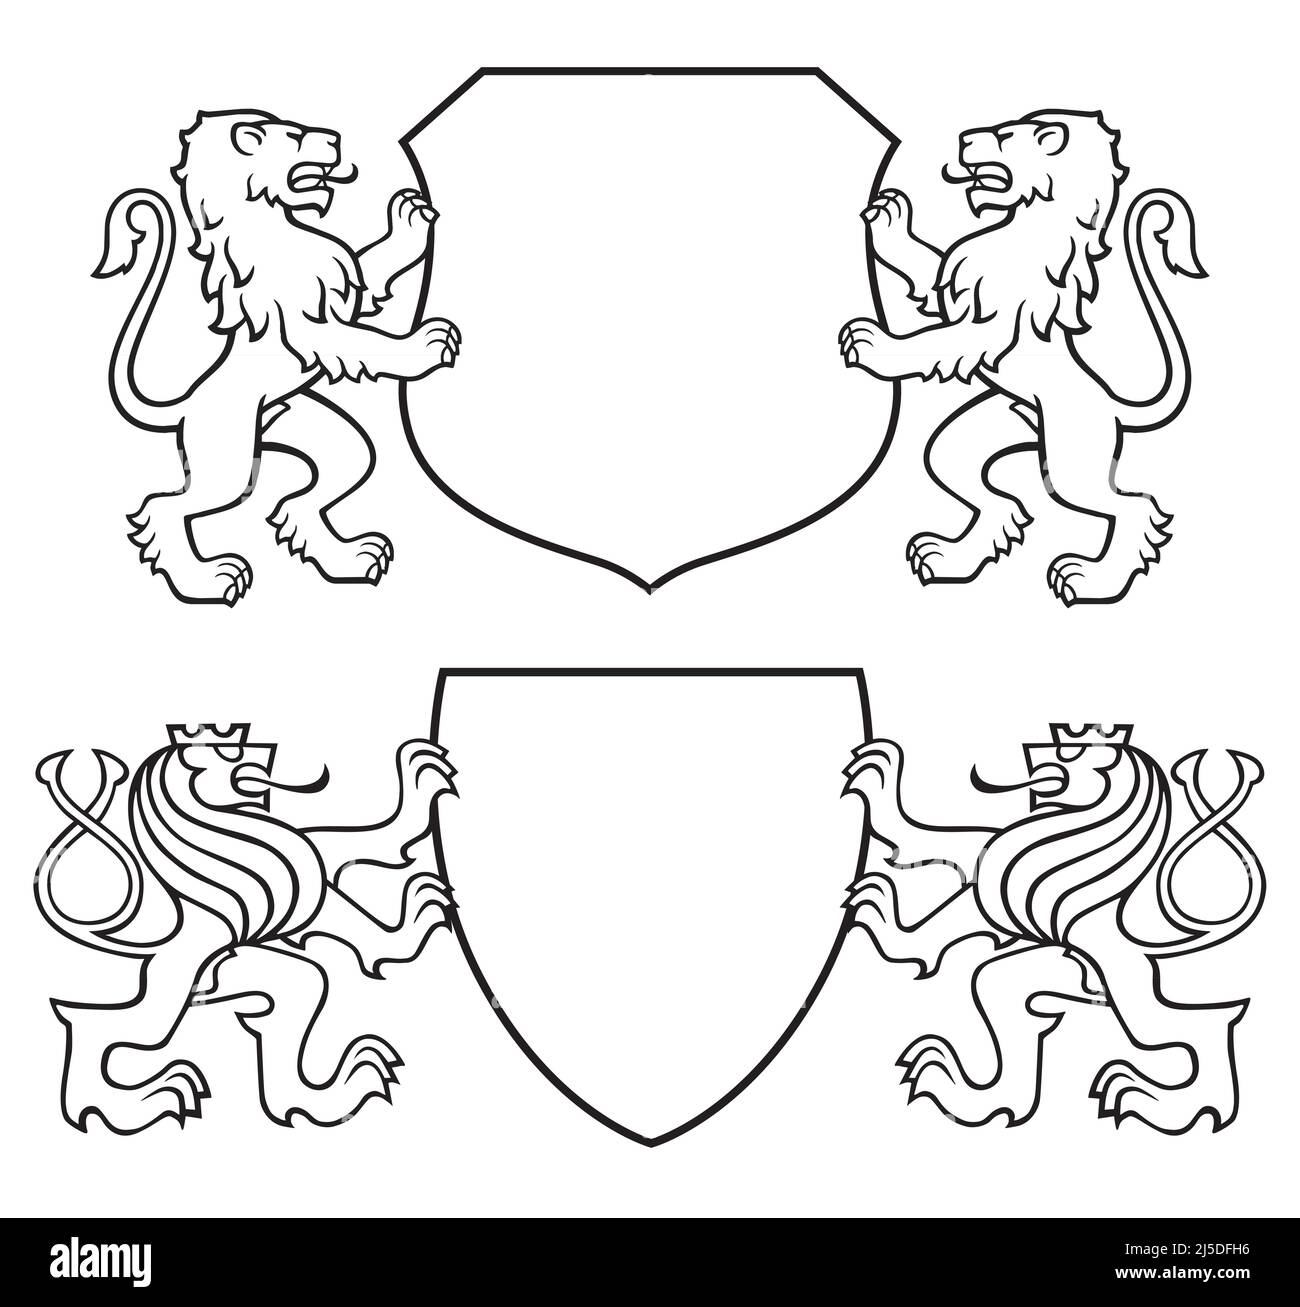 Coat of arms with lions isolated on white background. illustration Stock Vector